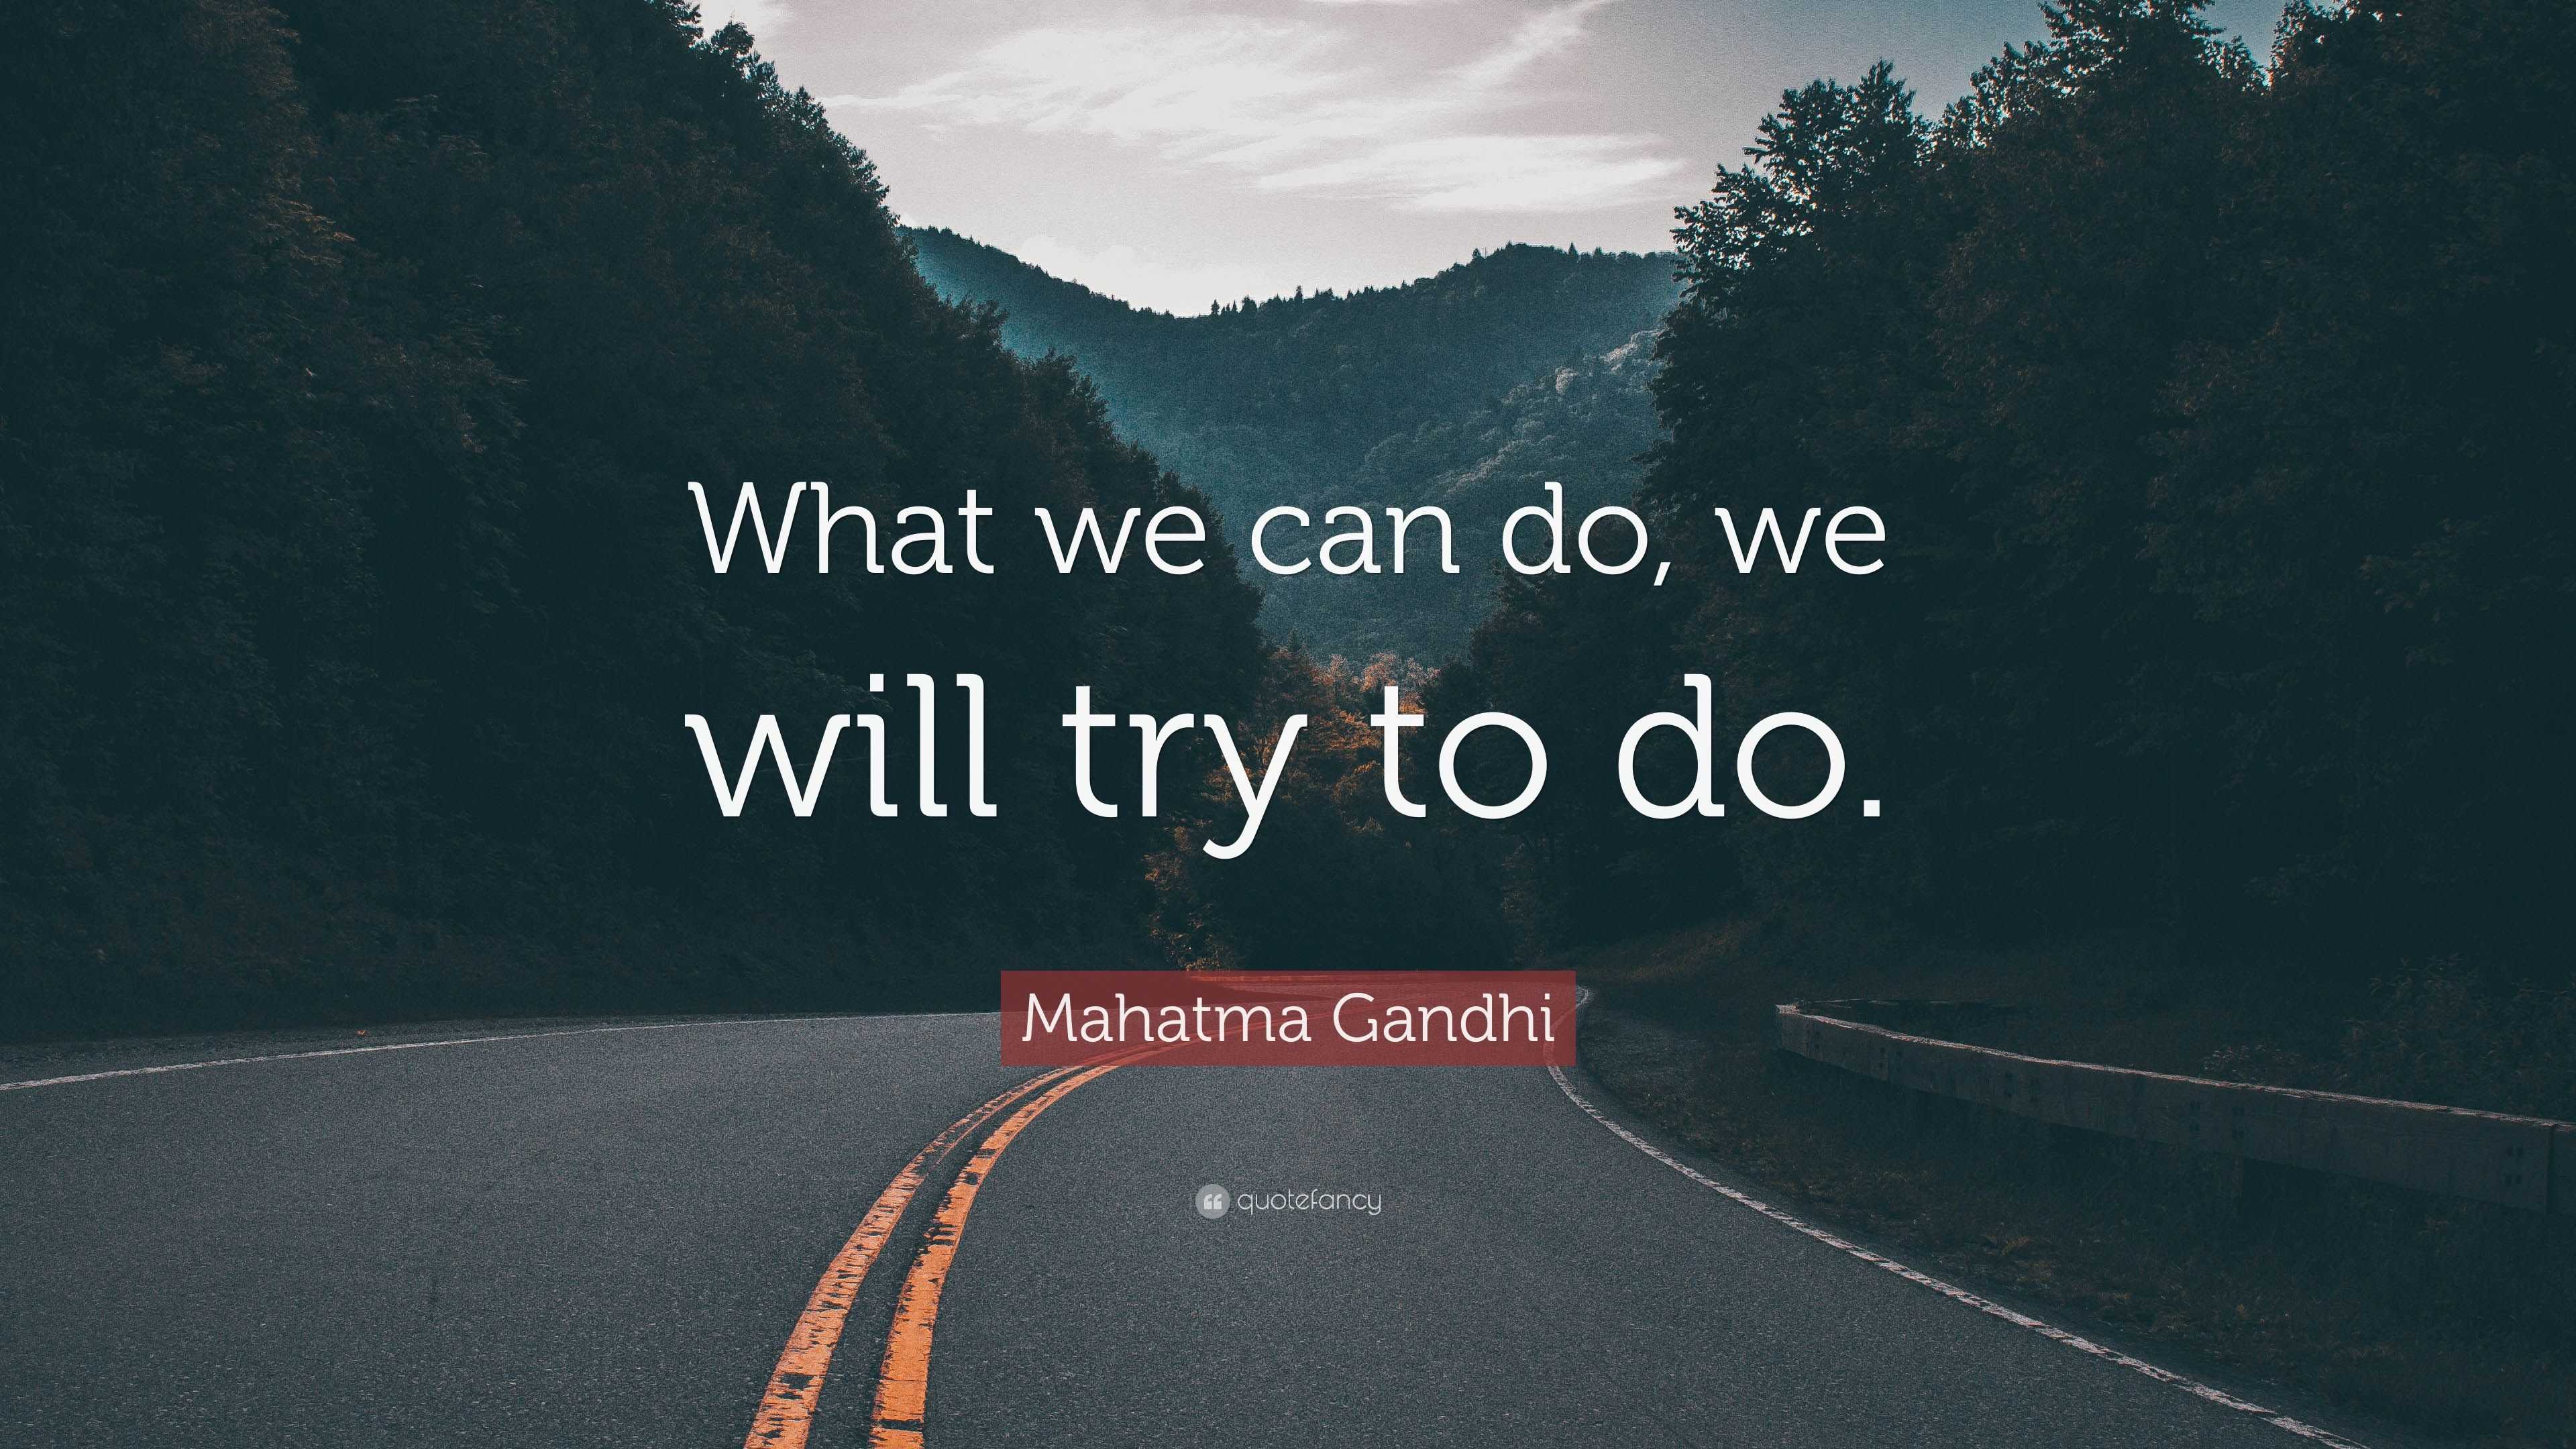 Mahatma Gandhi Quote: “What we can do, we will try to do.”